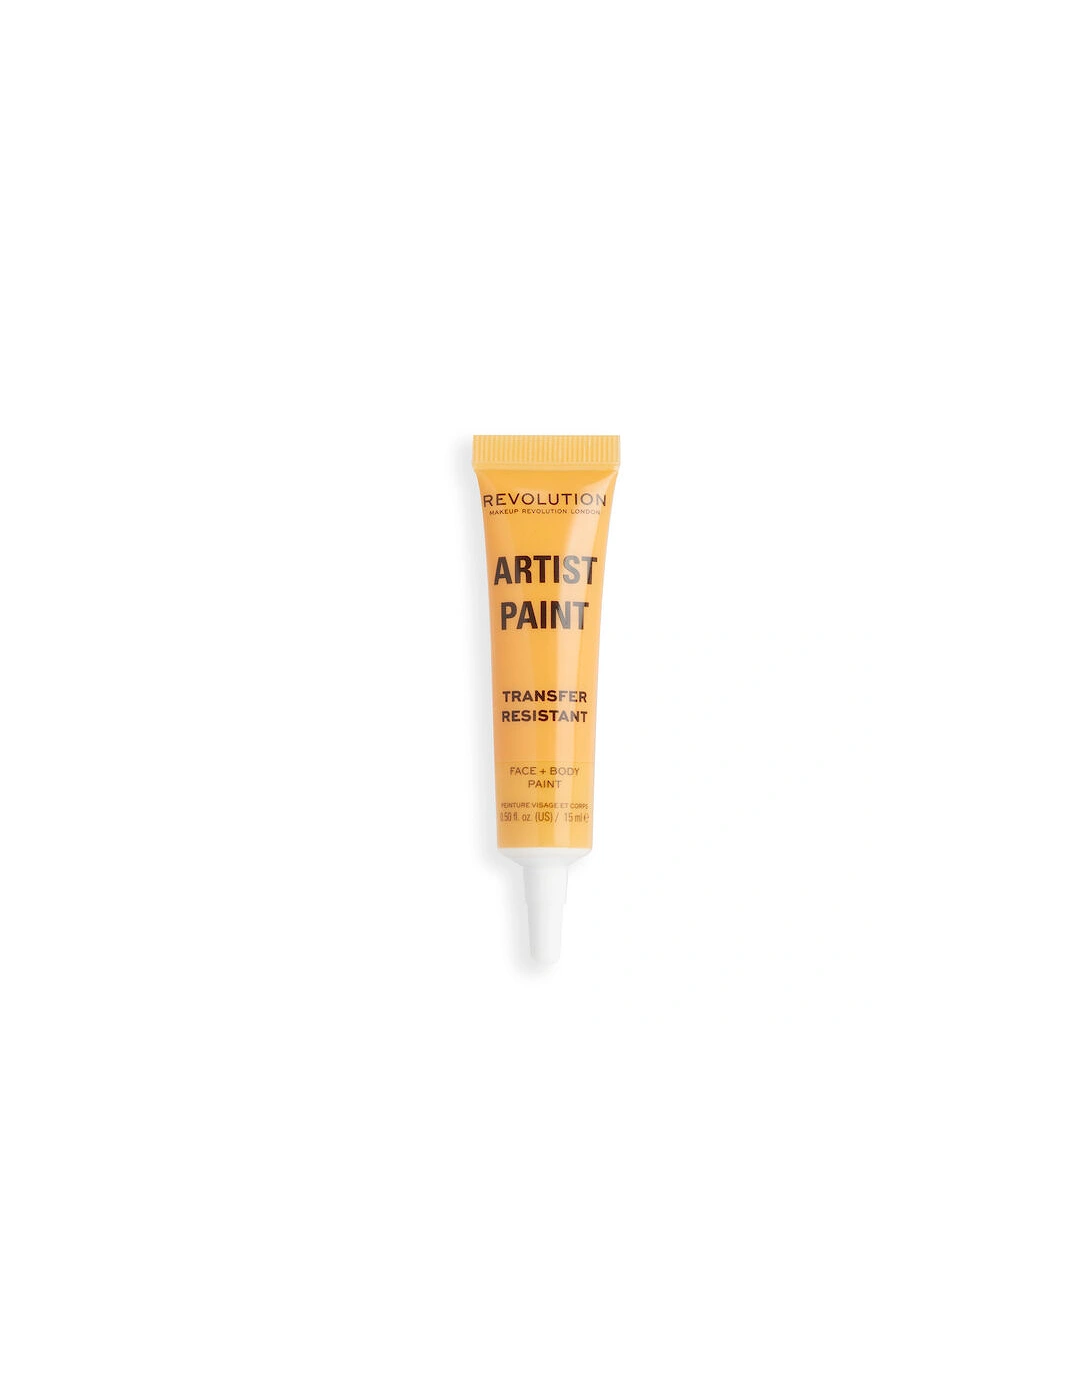 Makeup Artist Collection Artist Face & Body Paint Yellow, 2 of 1